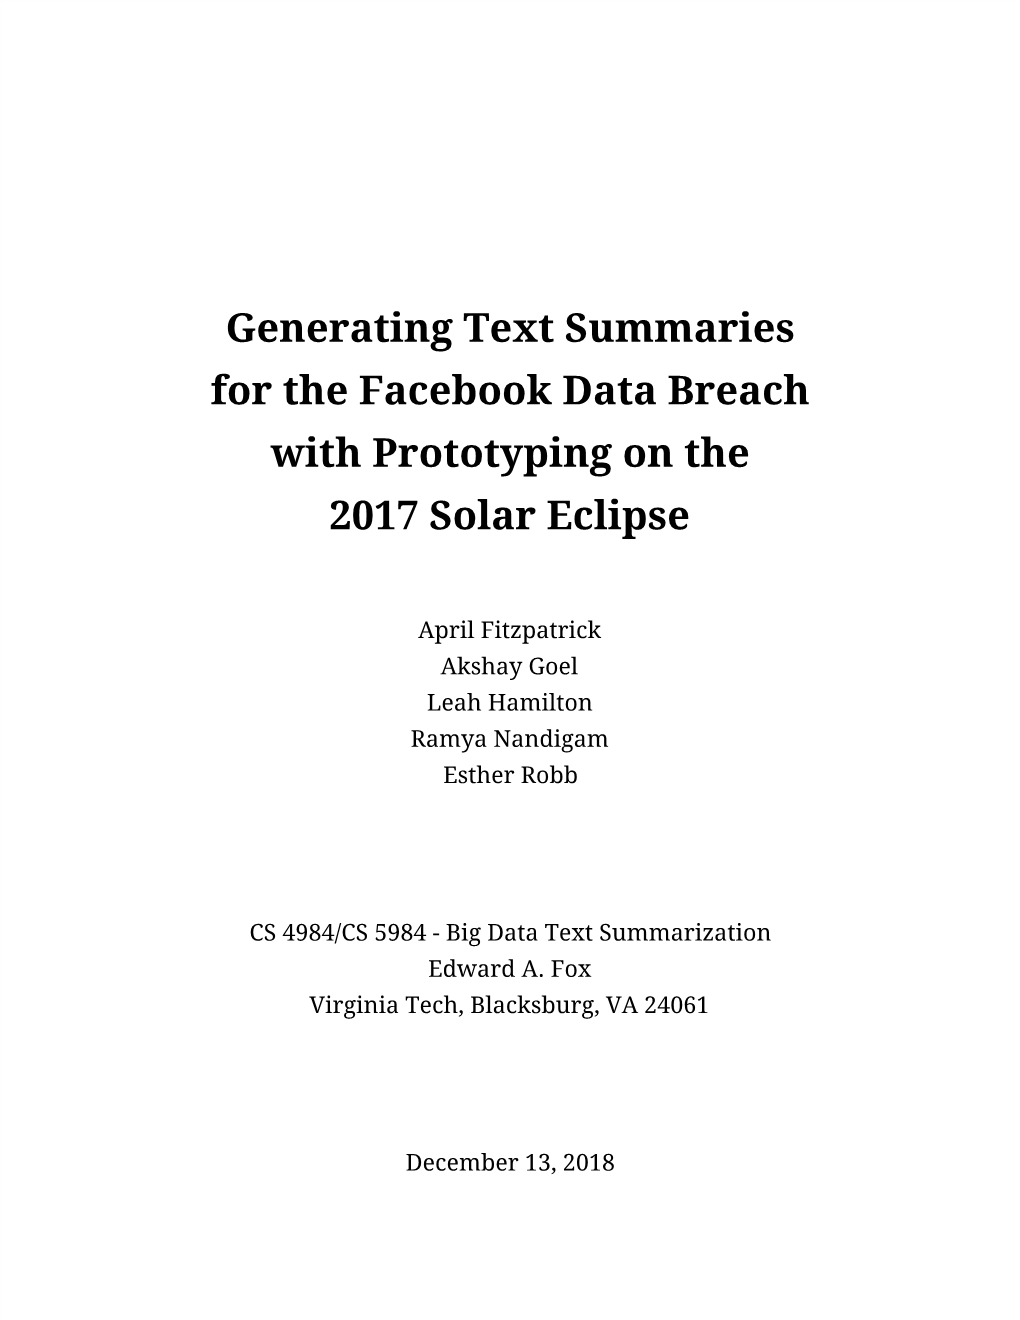 Generating Text Summaries for the Facebook Data Breach with Prototyping on the 2017 Solar Eclipse